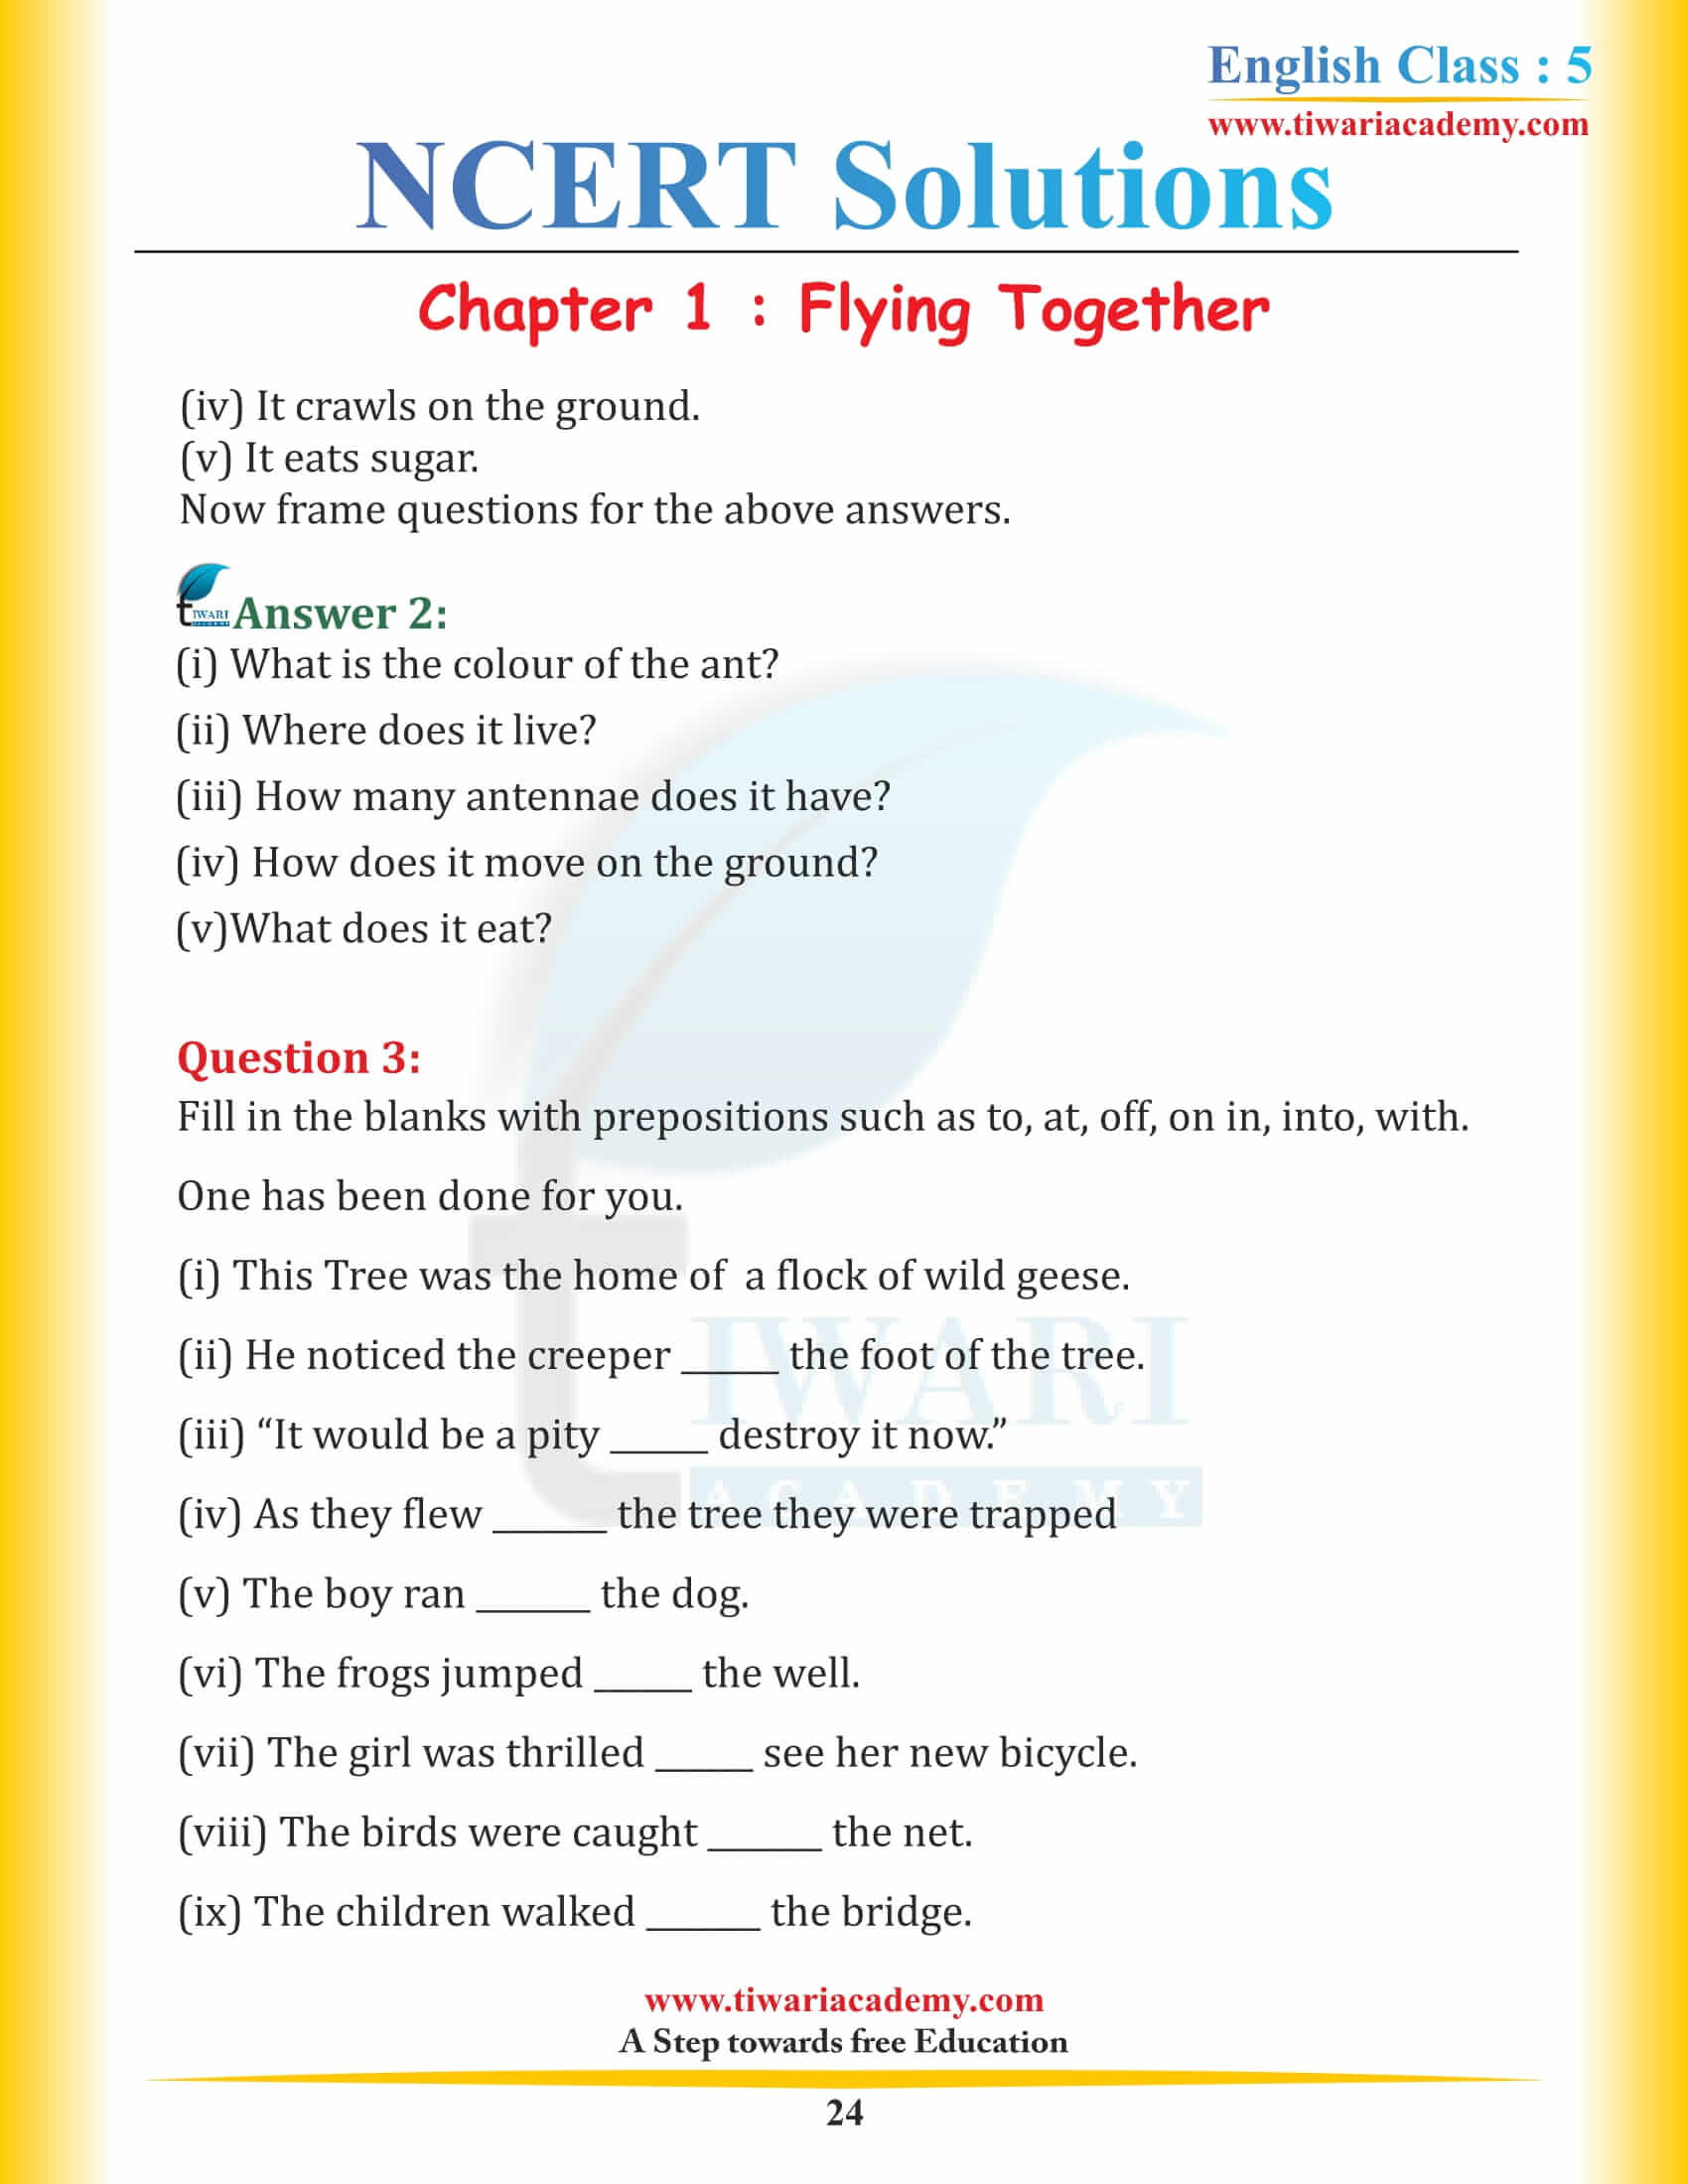 NCERT Solutions Class 5 English Chapter 1 Flying Together